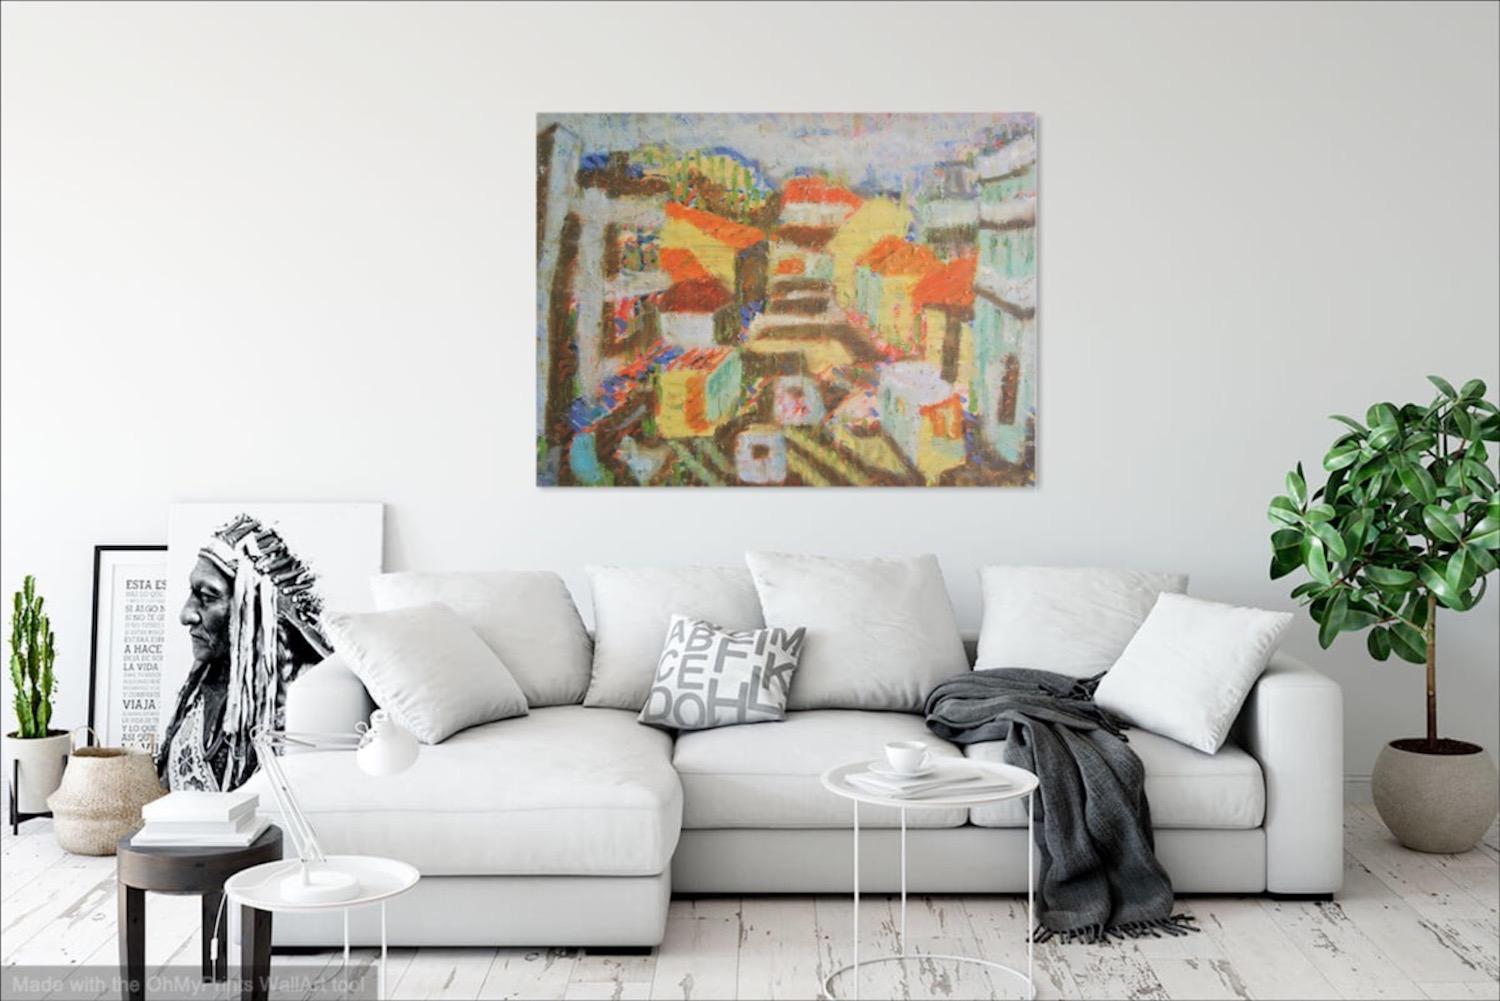 Journey To Town, abstract original oil painting art of Singapore town street landscape with peranakan shophouses in colorful abstract shapes